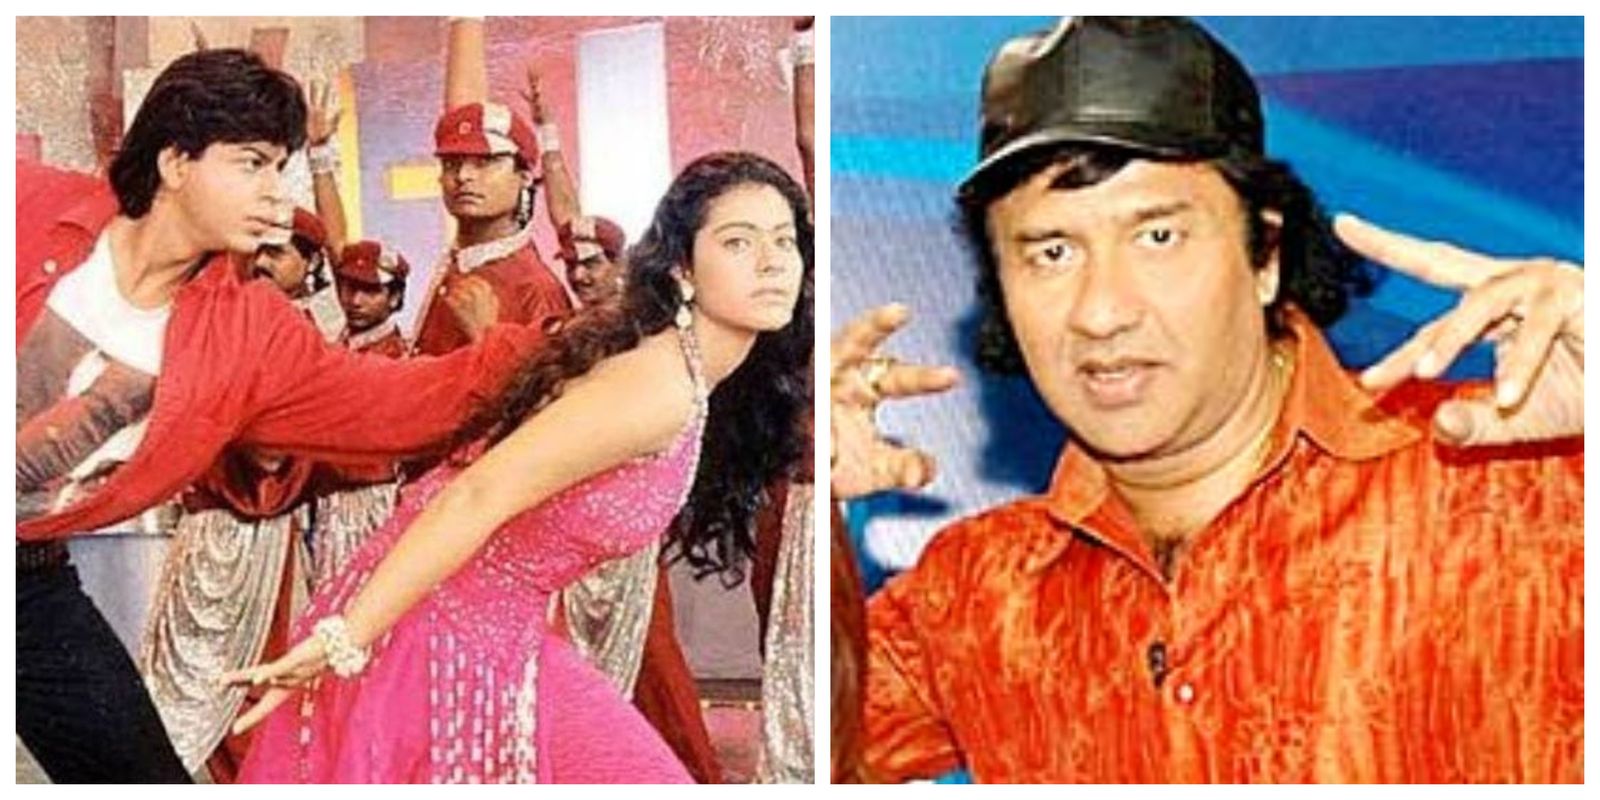 Anu Malik’s English Cover Of Baazigar’s Yeh Kaali Kaali Aankhein Called ‘You Look To Me A Virgin’ Can Put You Off Music Forever